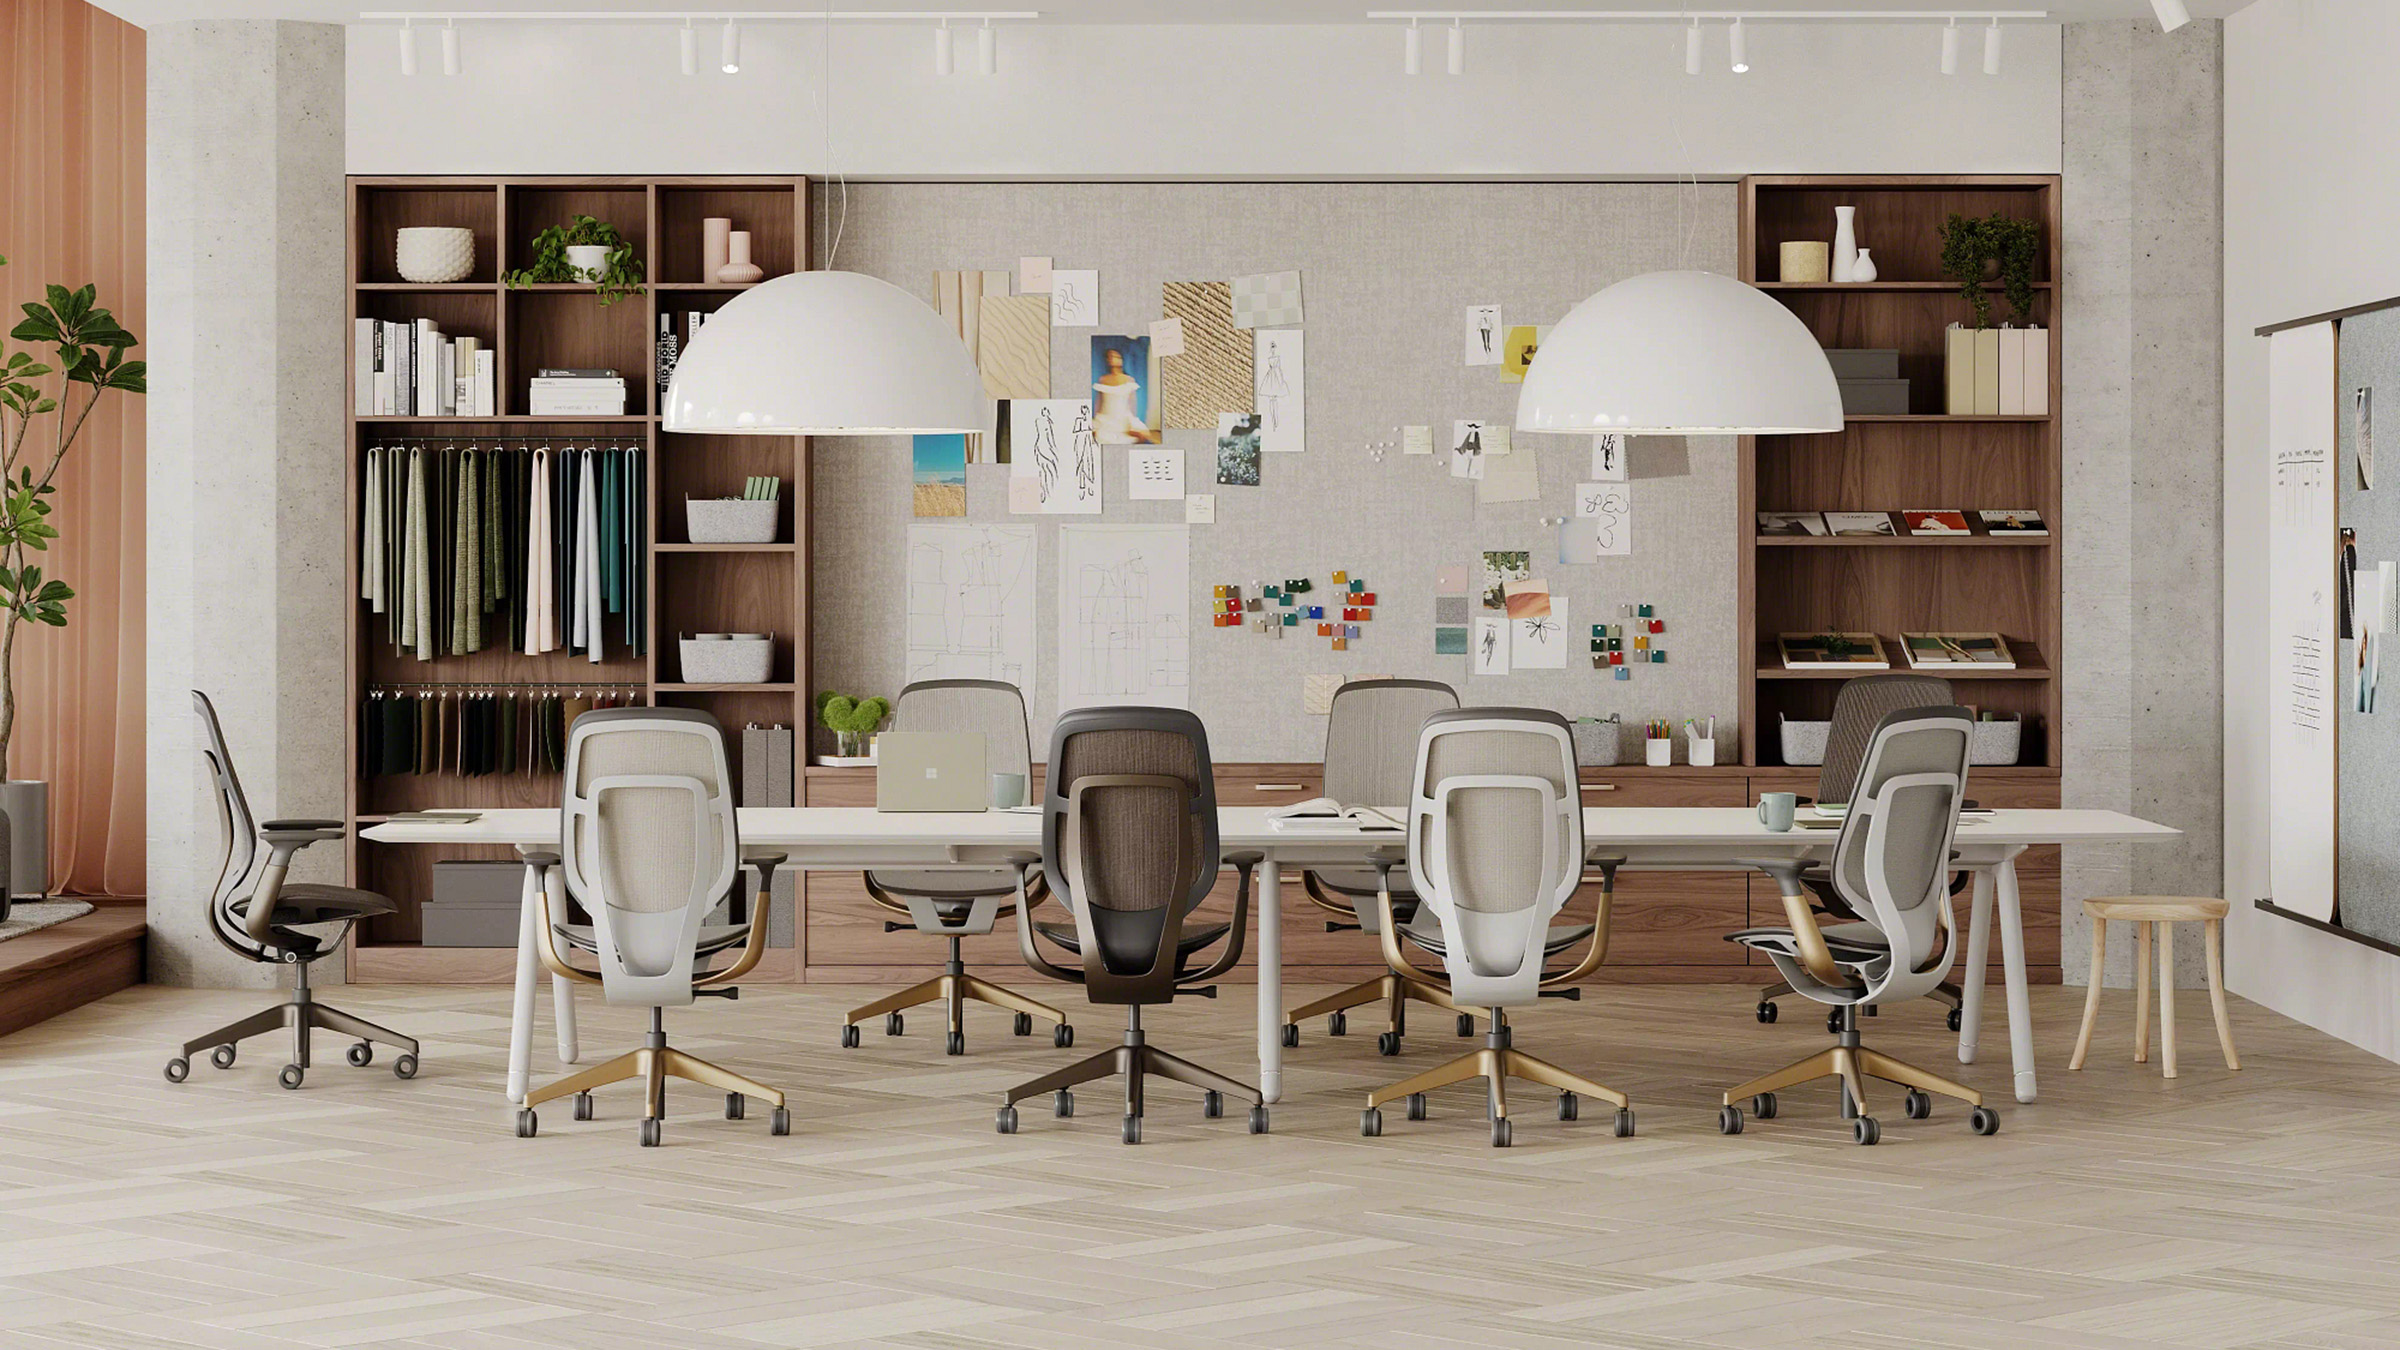 conference room with 7 karman chairs and a big white table